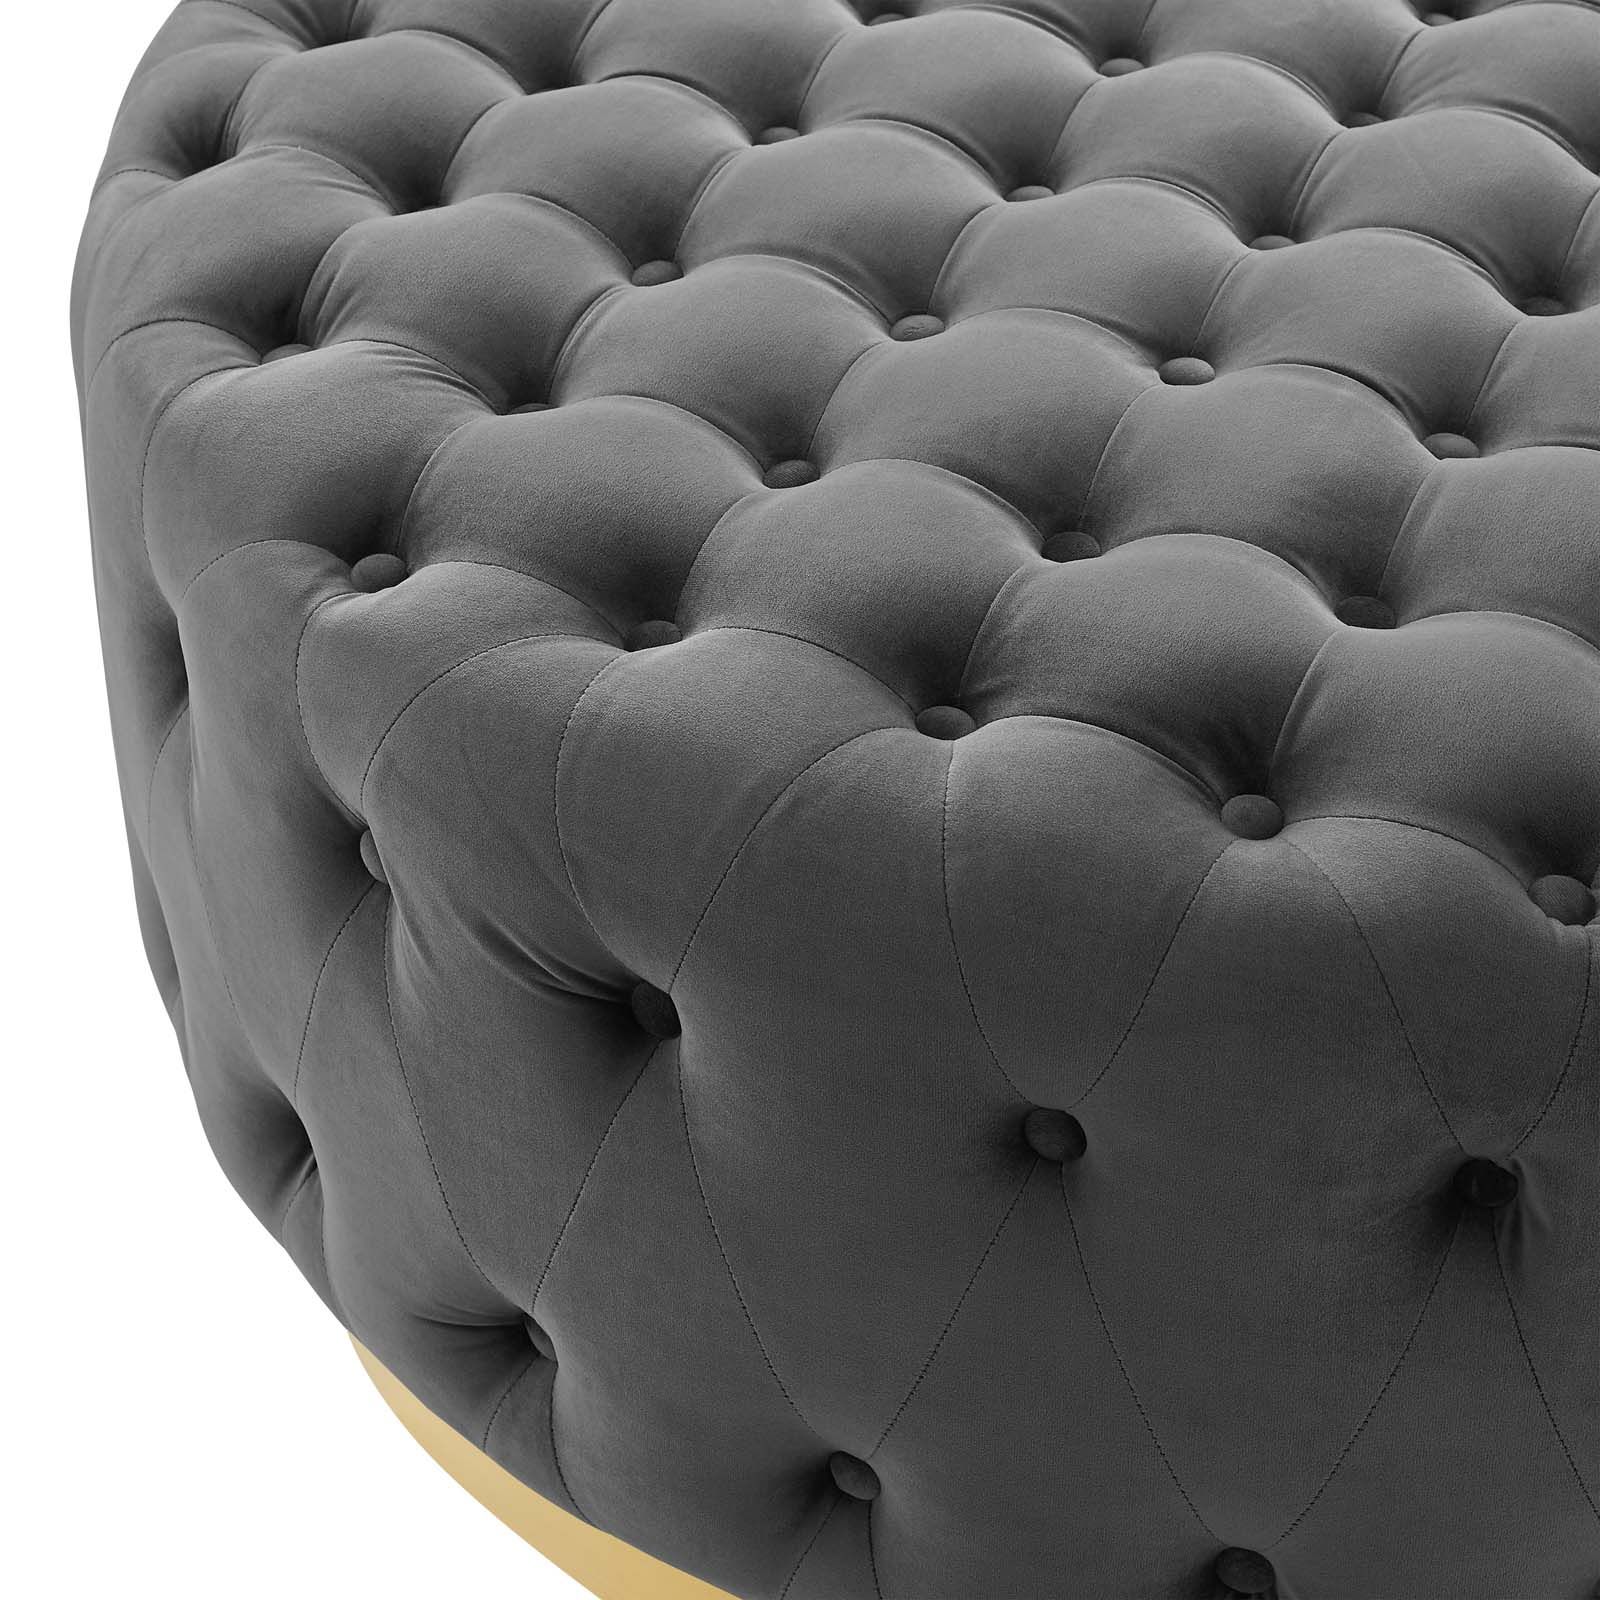 Widely Used Tufted Gray Velvet Ottomans In Ensconce Tufted Performance Velvet Round Ottoman Gray (View 1 of 10)